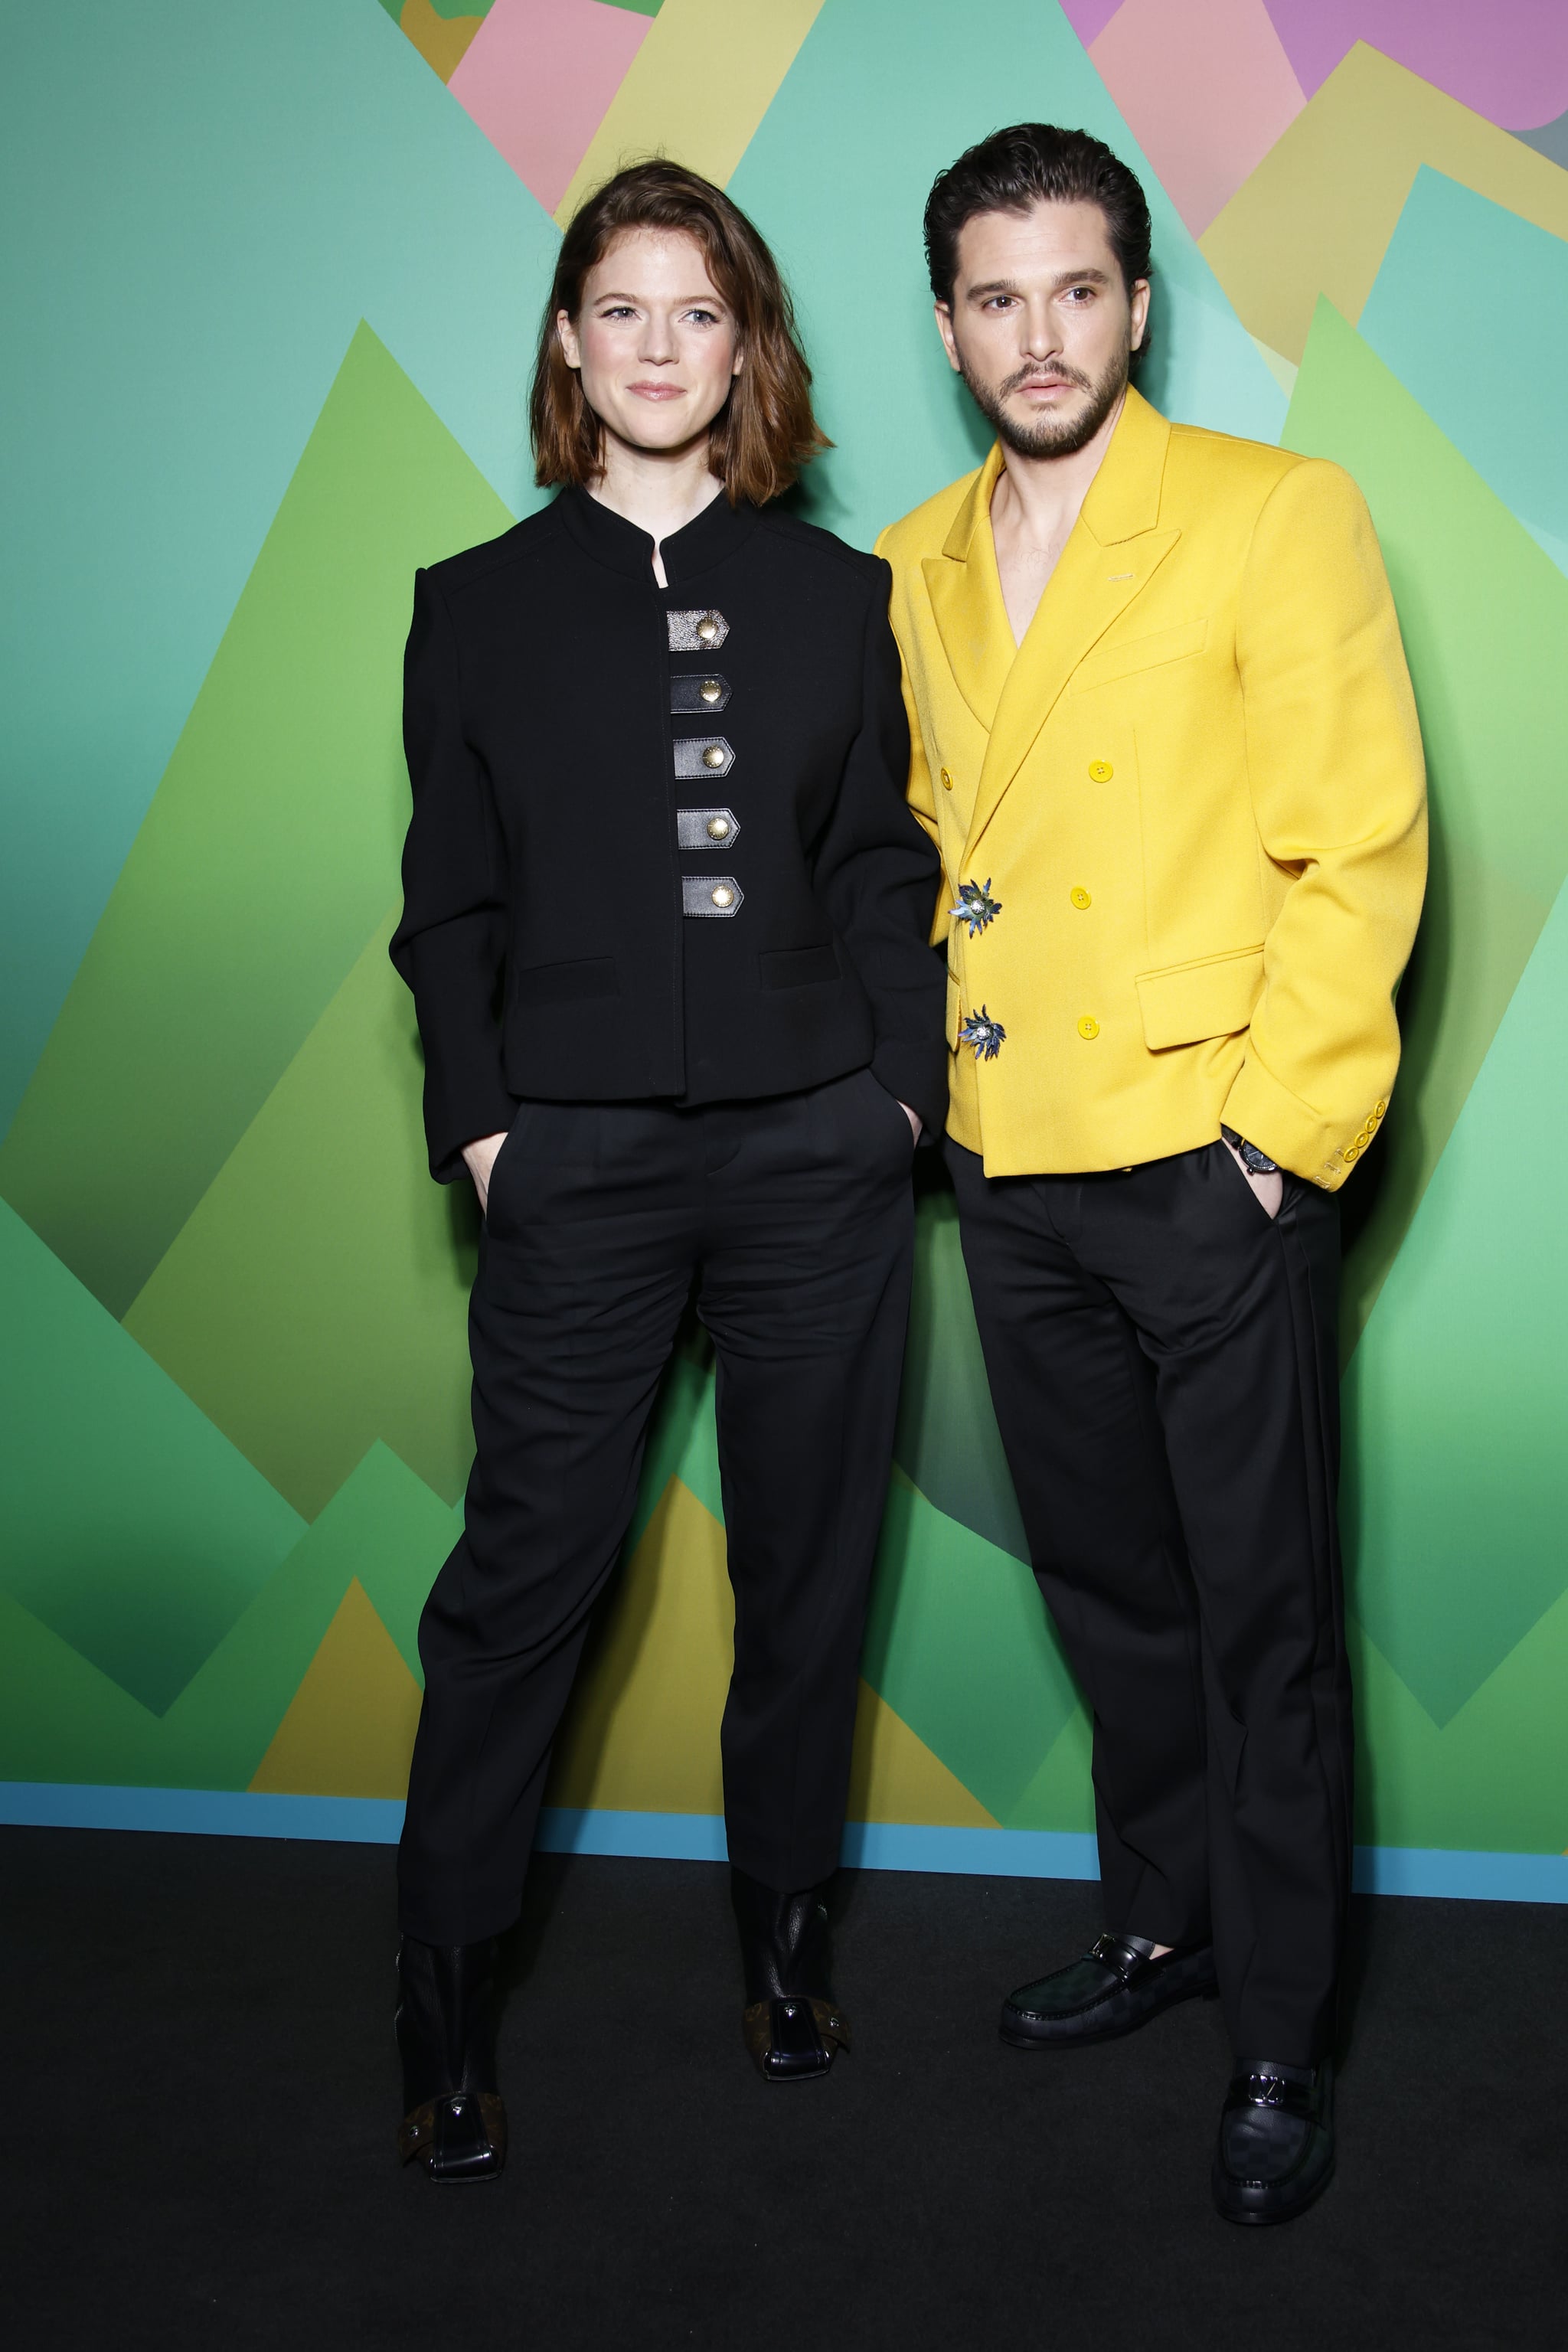 World News PARIS, FRANCE - JANUARY 19: (EDITORIAL USE ONLY - For Non-Editorial expend please look approval from Style Home) Rose Leslie and Kit Harington help the Louis Vuitton Menswear Fall-Iciness 2023-2024 direct as half of Paris Style Week  on January 19, 2023 in Paris, France. (Characterize by Julien Hekimian/Getty Photos)